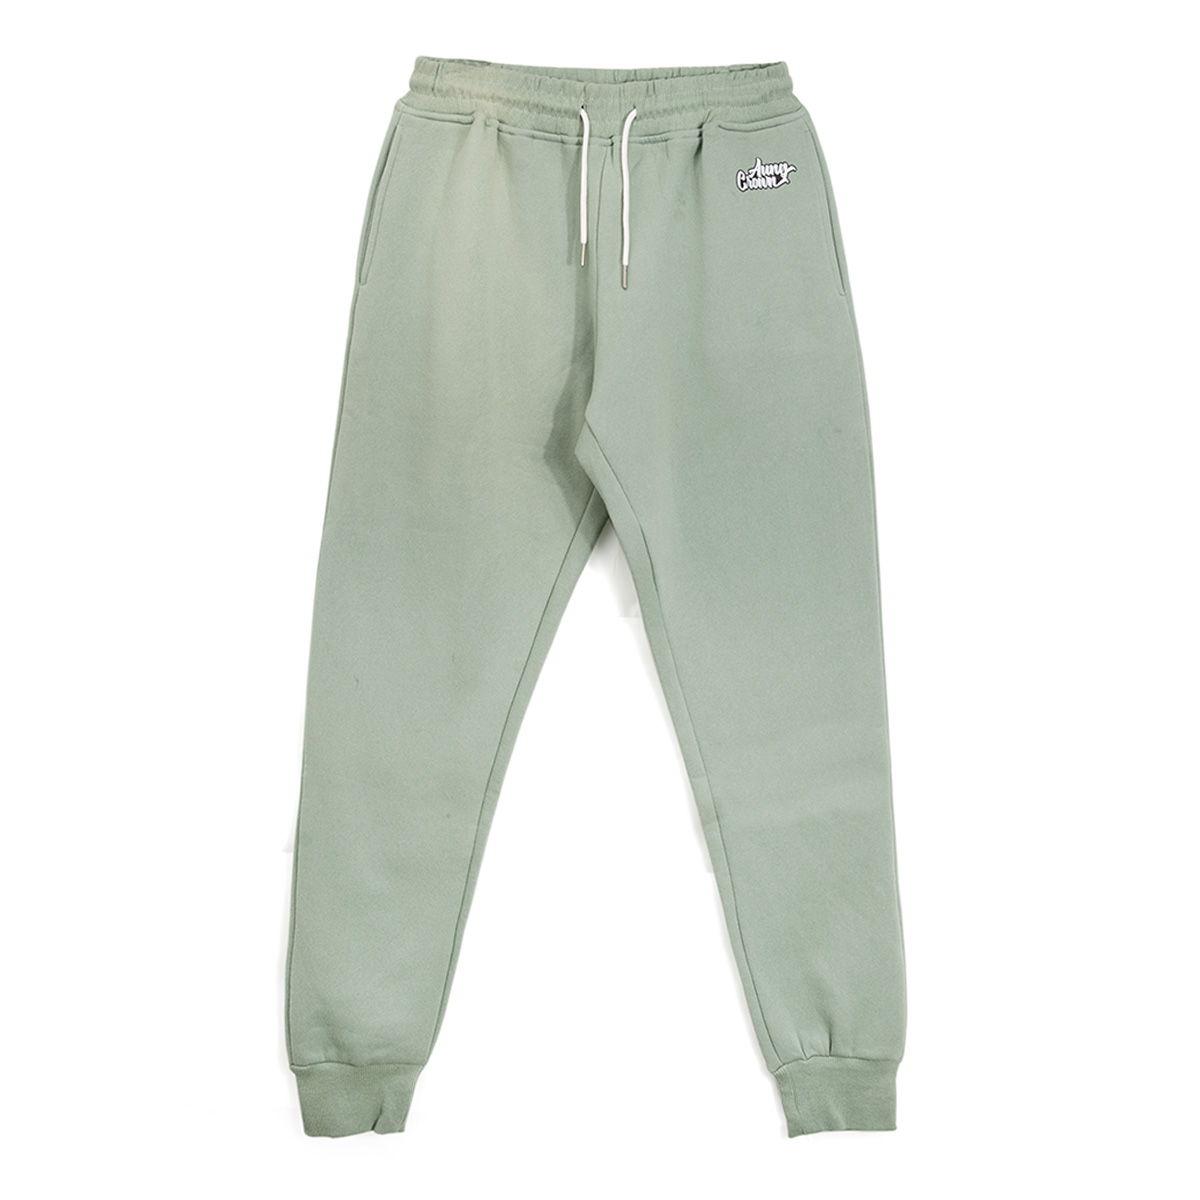 AungCrown designed loose and casual waisted sweatpants with pockets